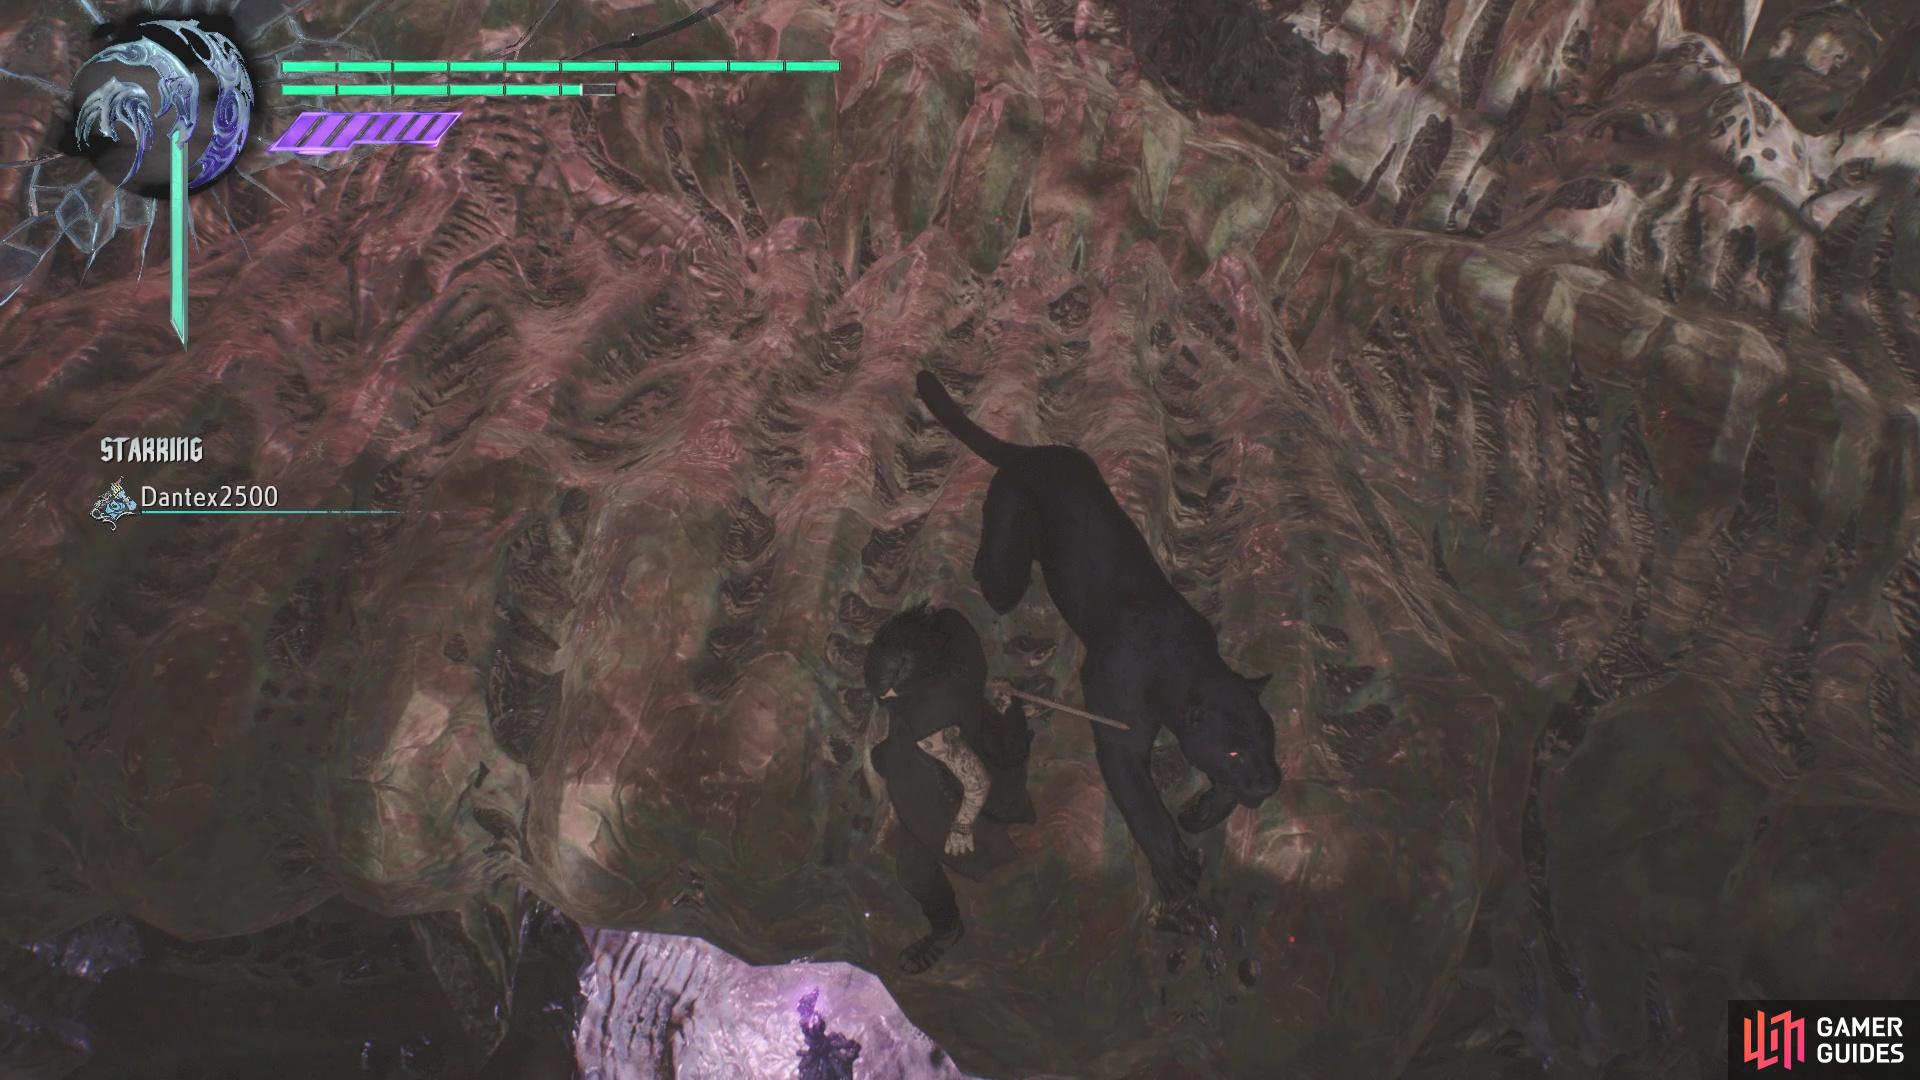 Look over the edge at the fork to find a Purple Orb Fragment